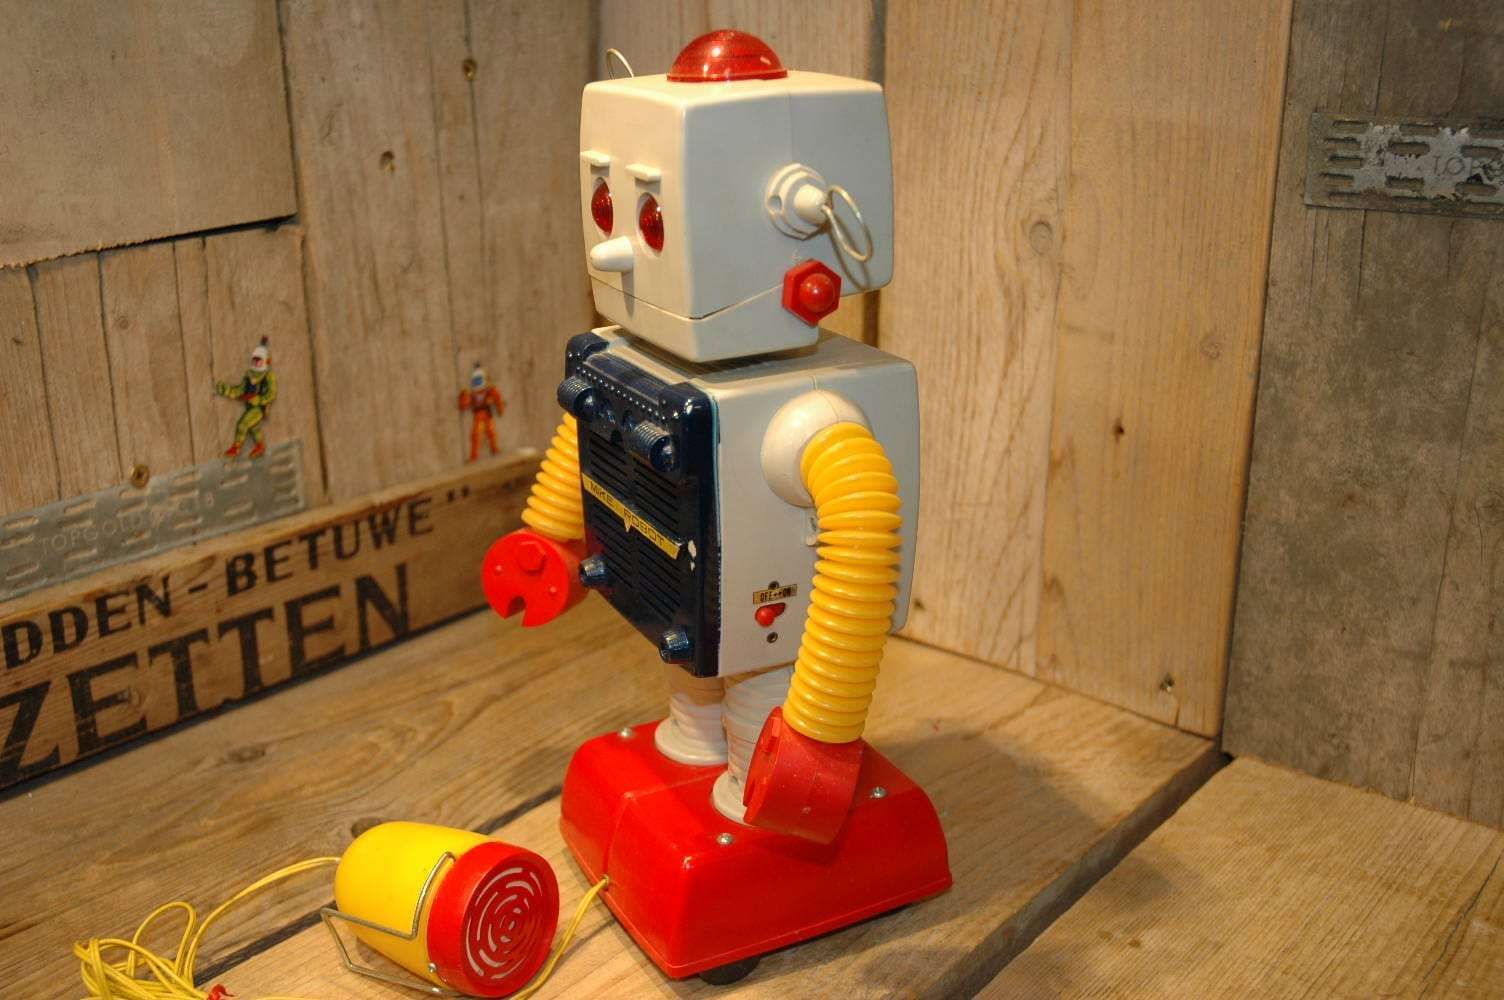 tomy - mike robot